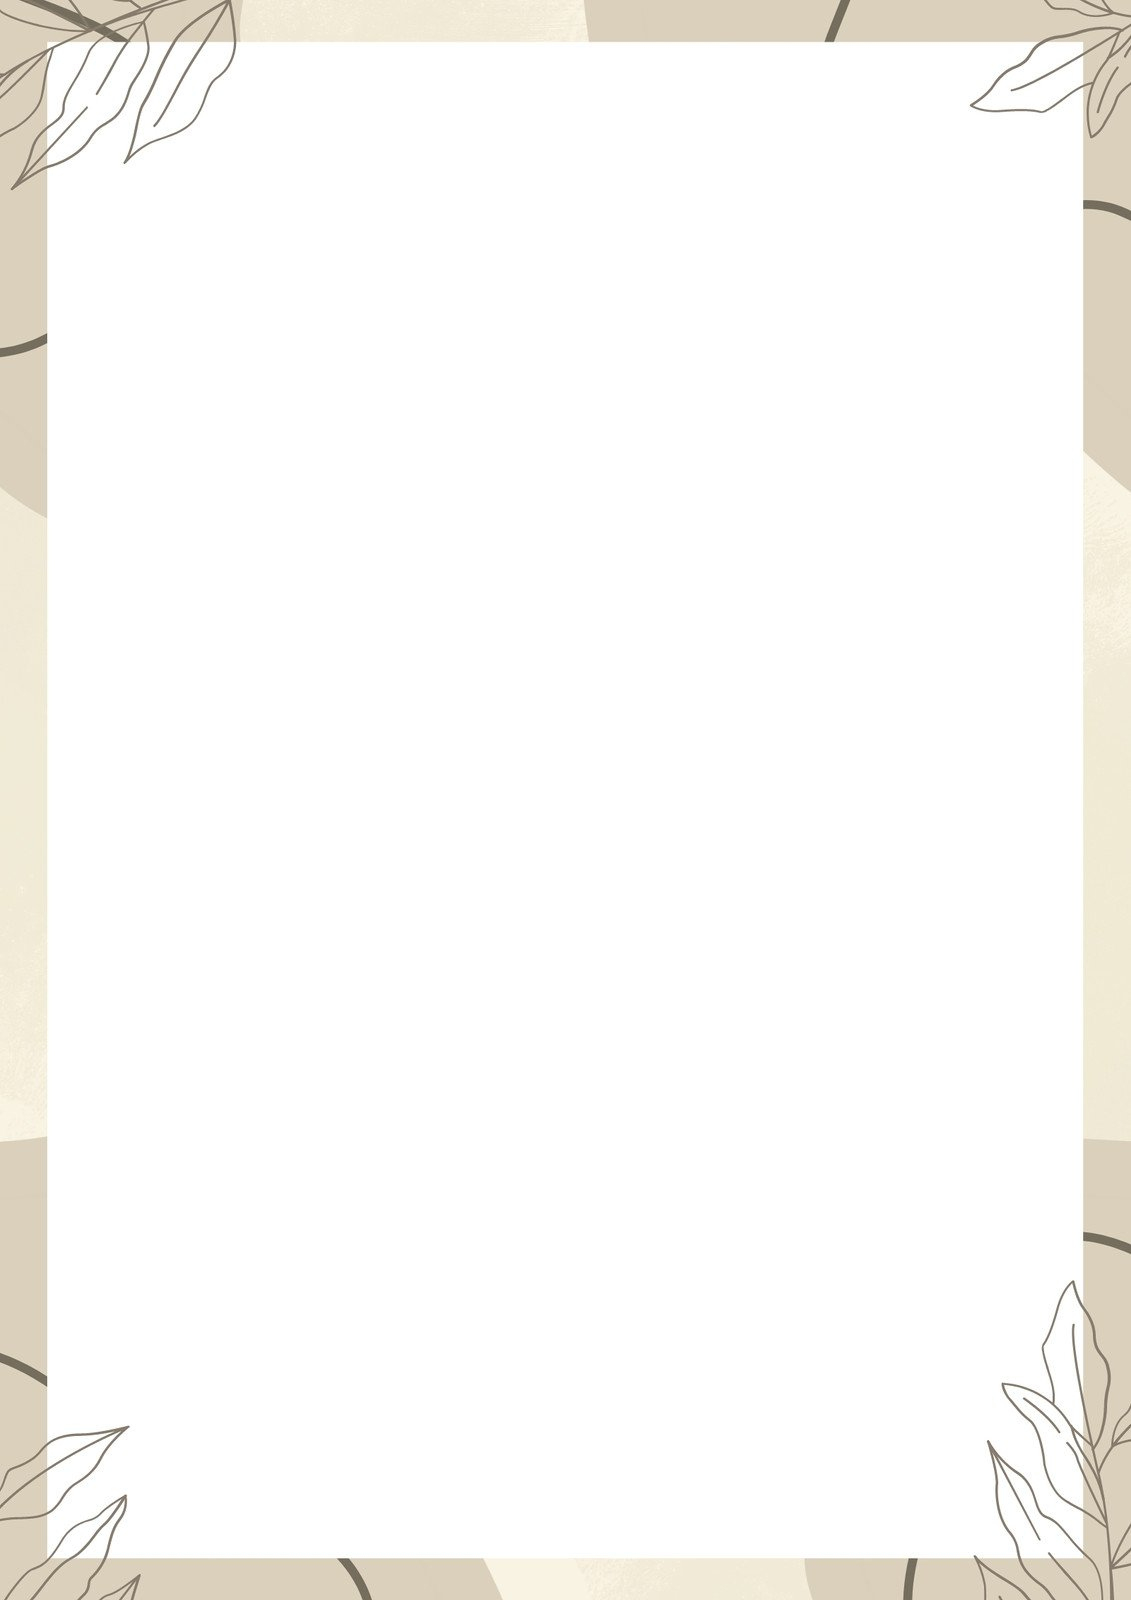 Free Printable Page Border Templates You Can Customize | Canva regarding Free Printable Page Borders